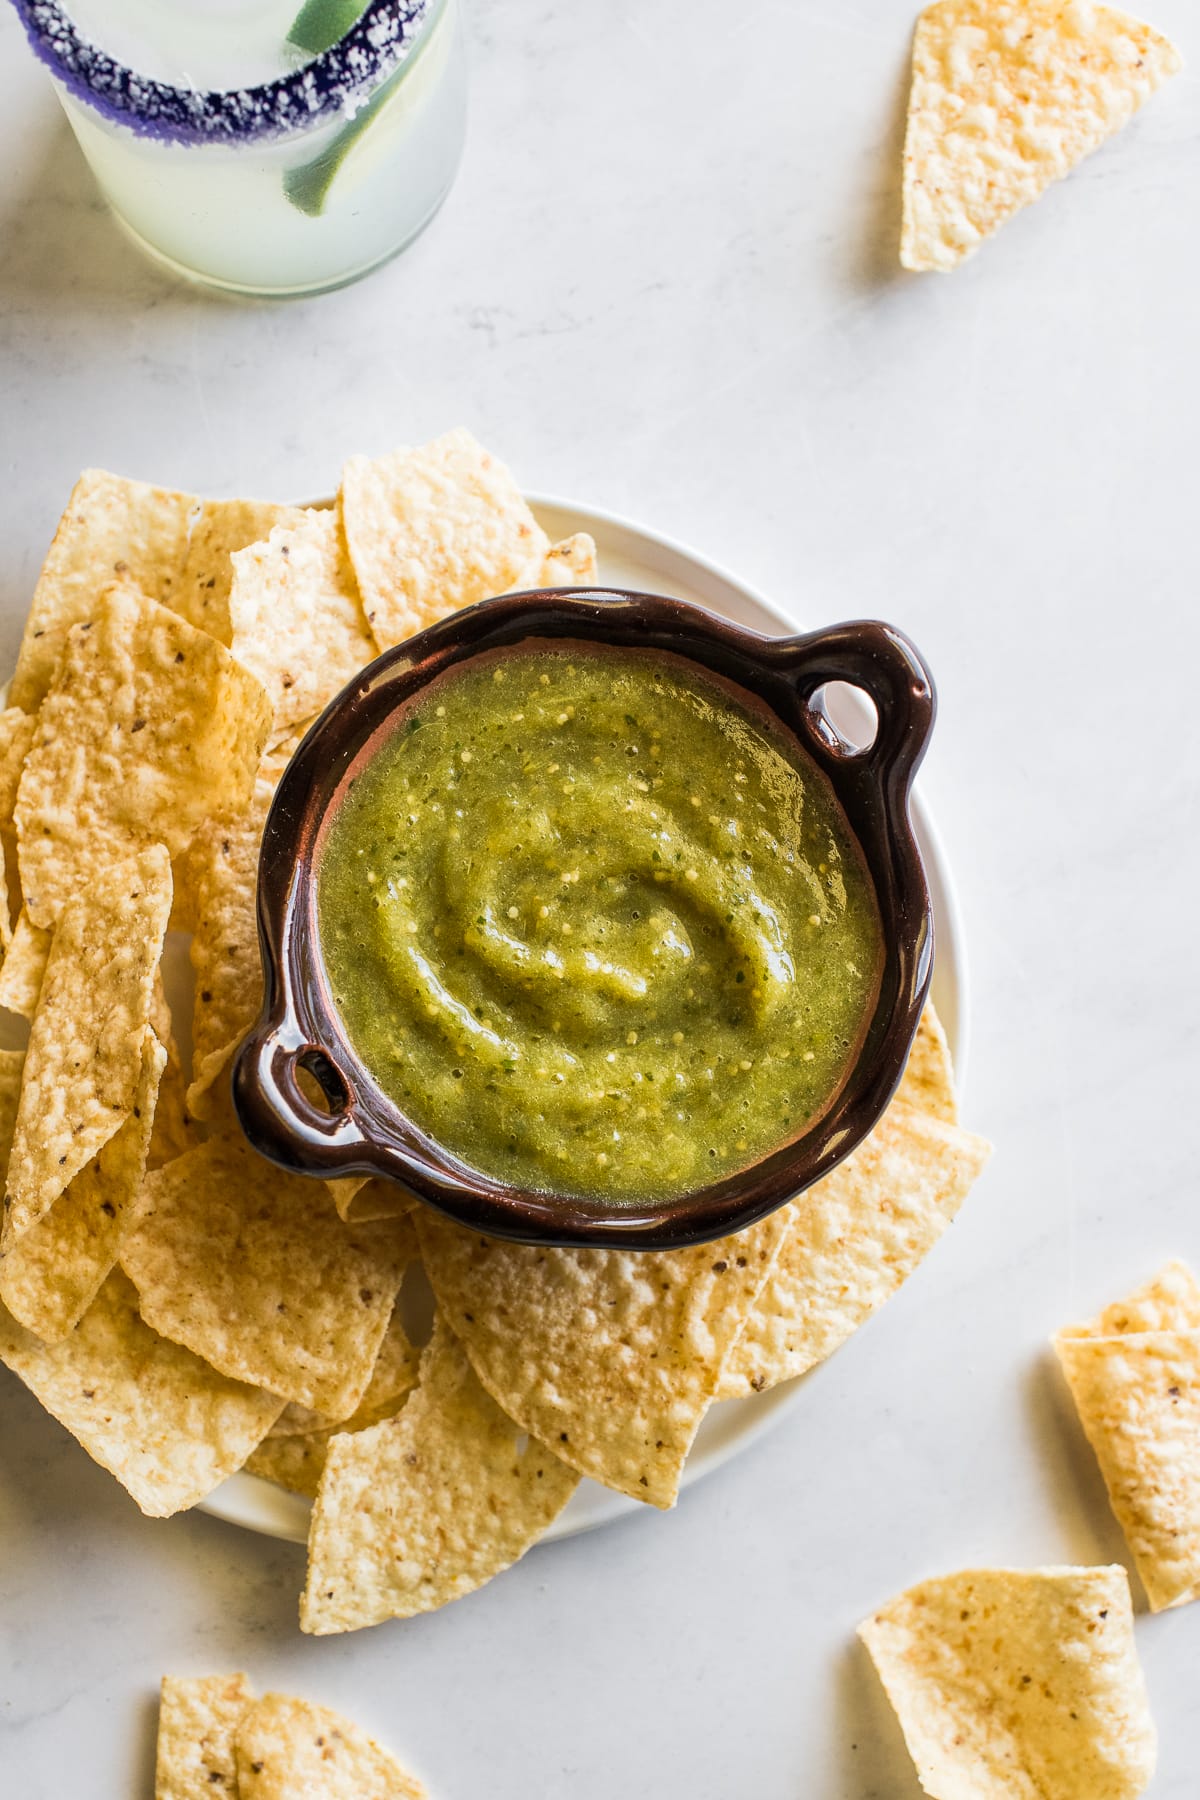 Salsa verde on a table next to tortilla chips.